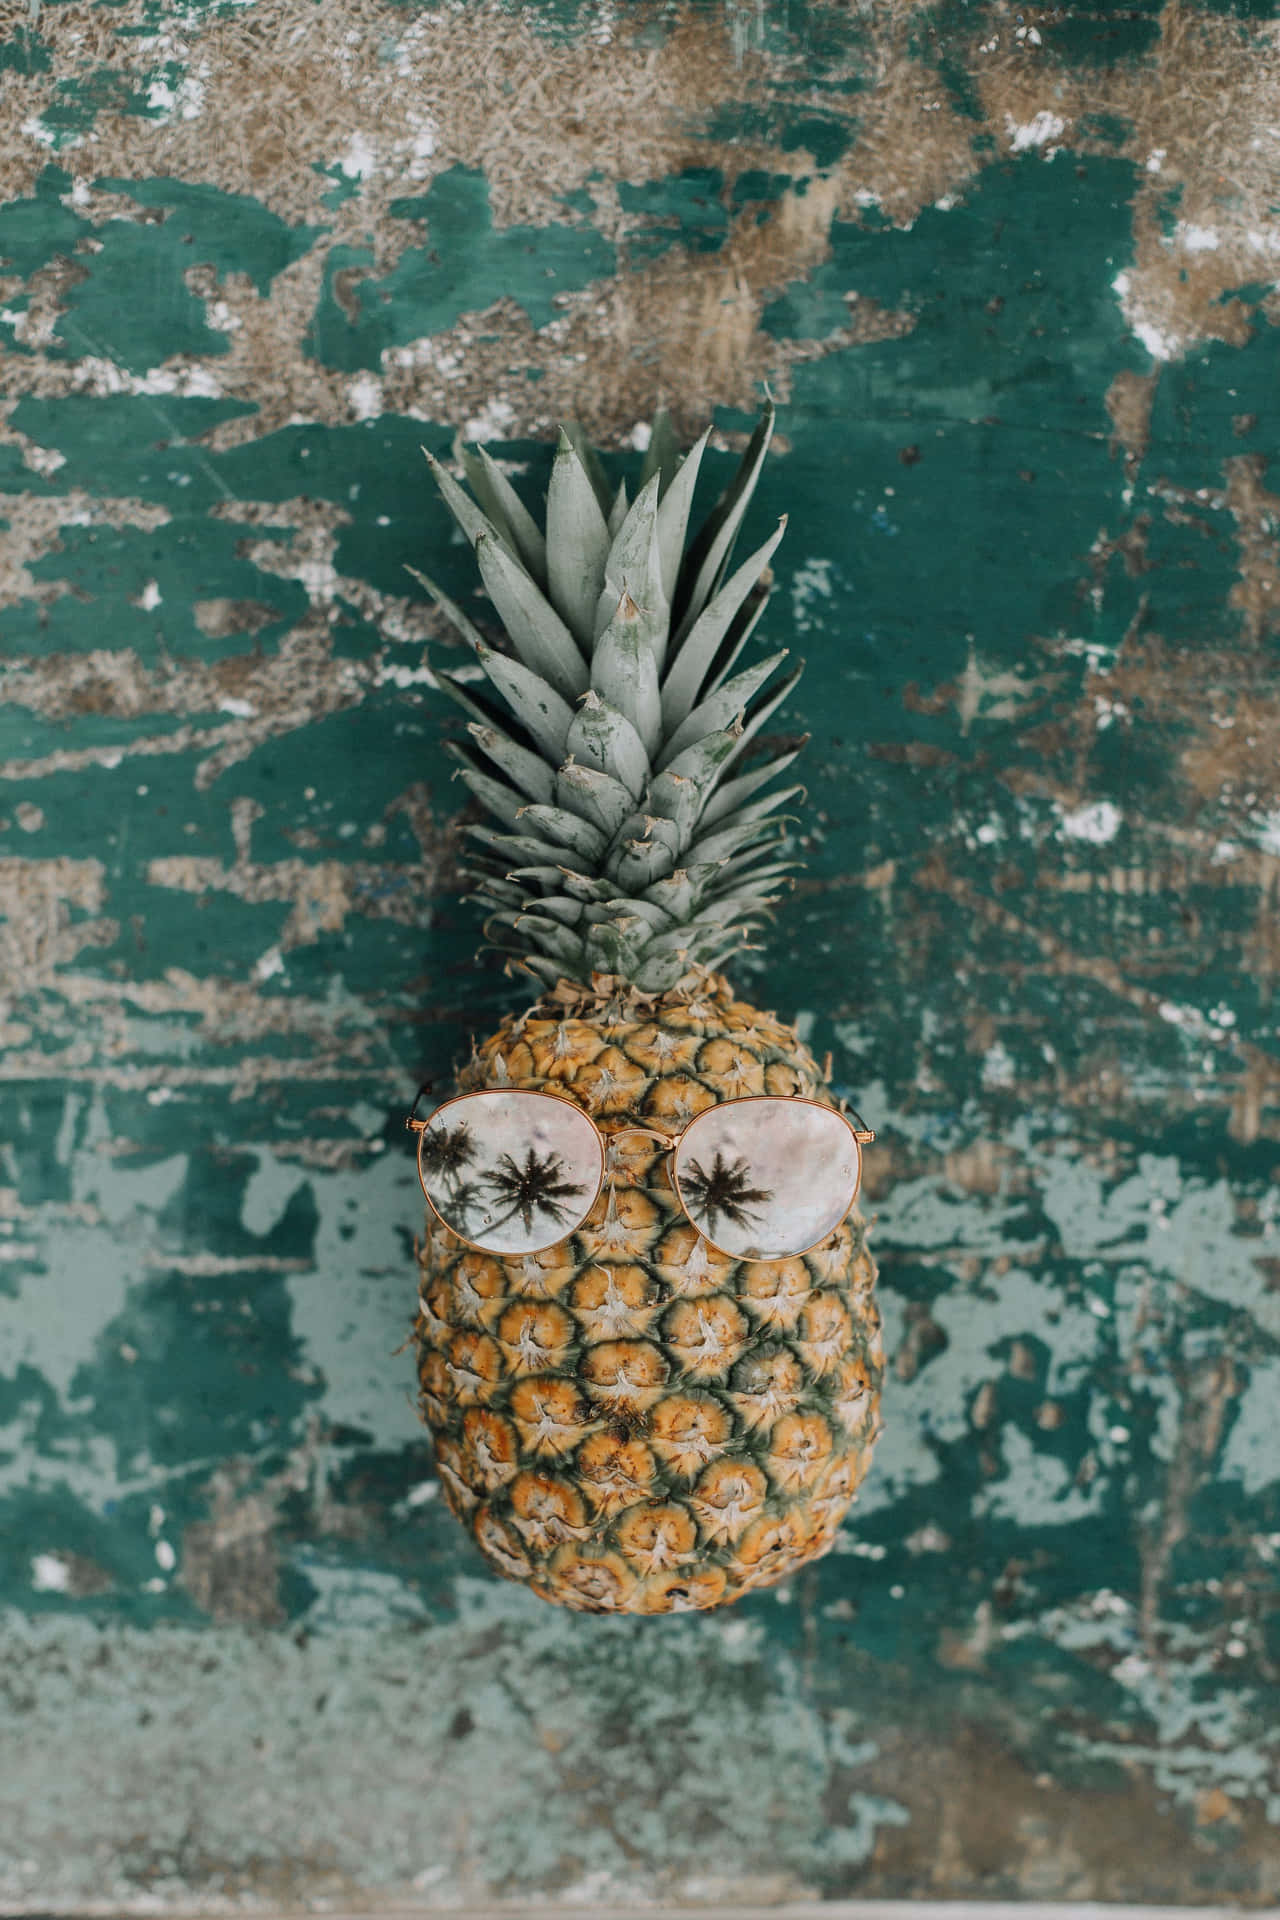 Download Tropical Delights - Enjoy a delicious pineapple fruit